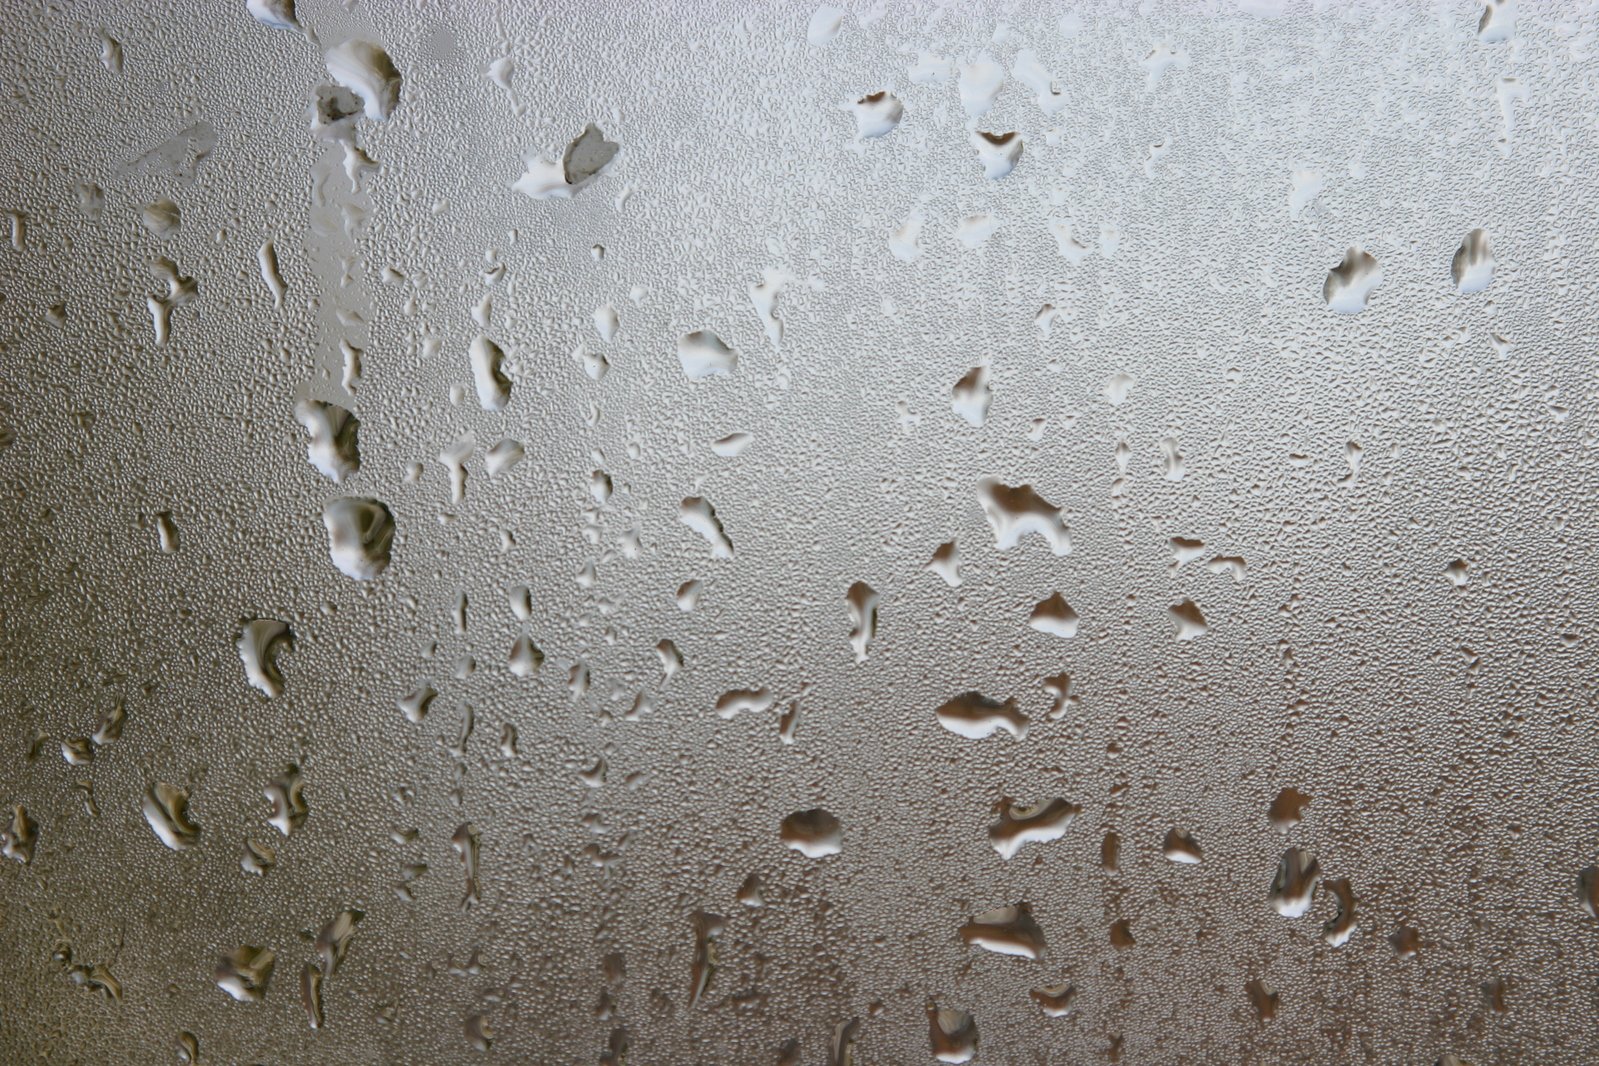 droplets of rain on a glass window during the day